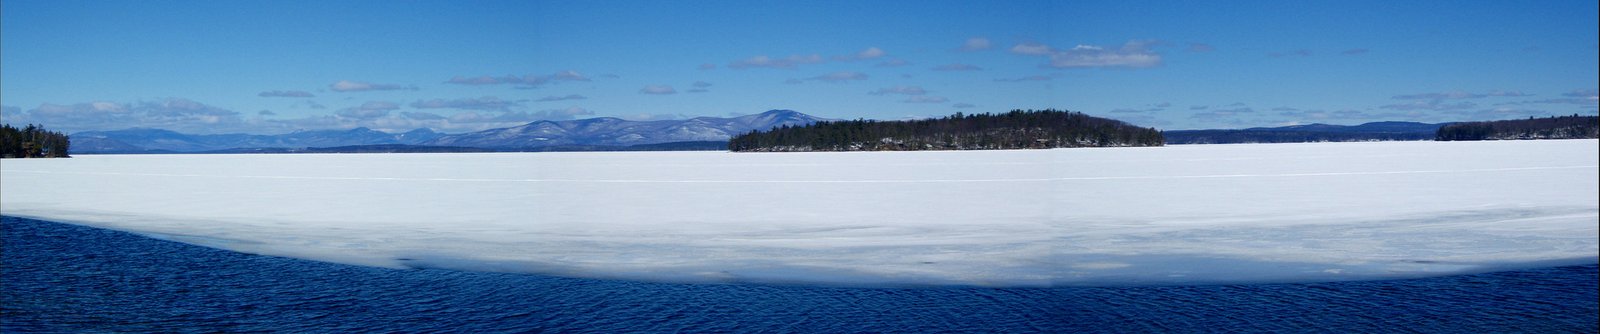 Lake Winnipesaukee Info | Lakes Region New Hampshire Information –  NH Vacation Attractions, Dining, Lodging, Boating, Beaches, Fishing, Hiking, Snowmobiling